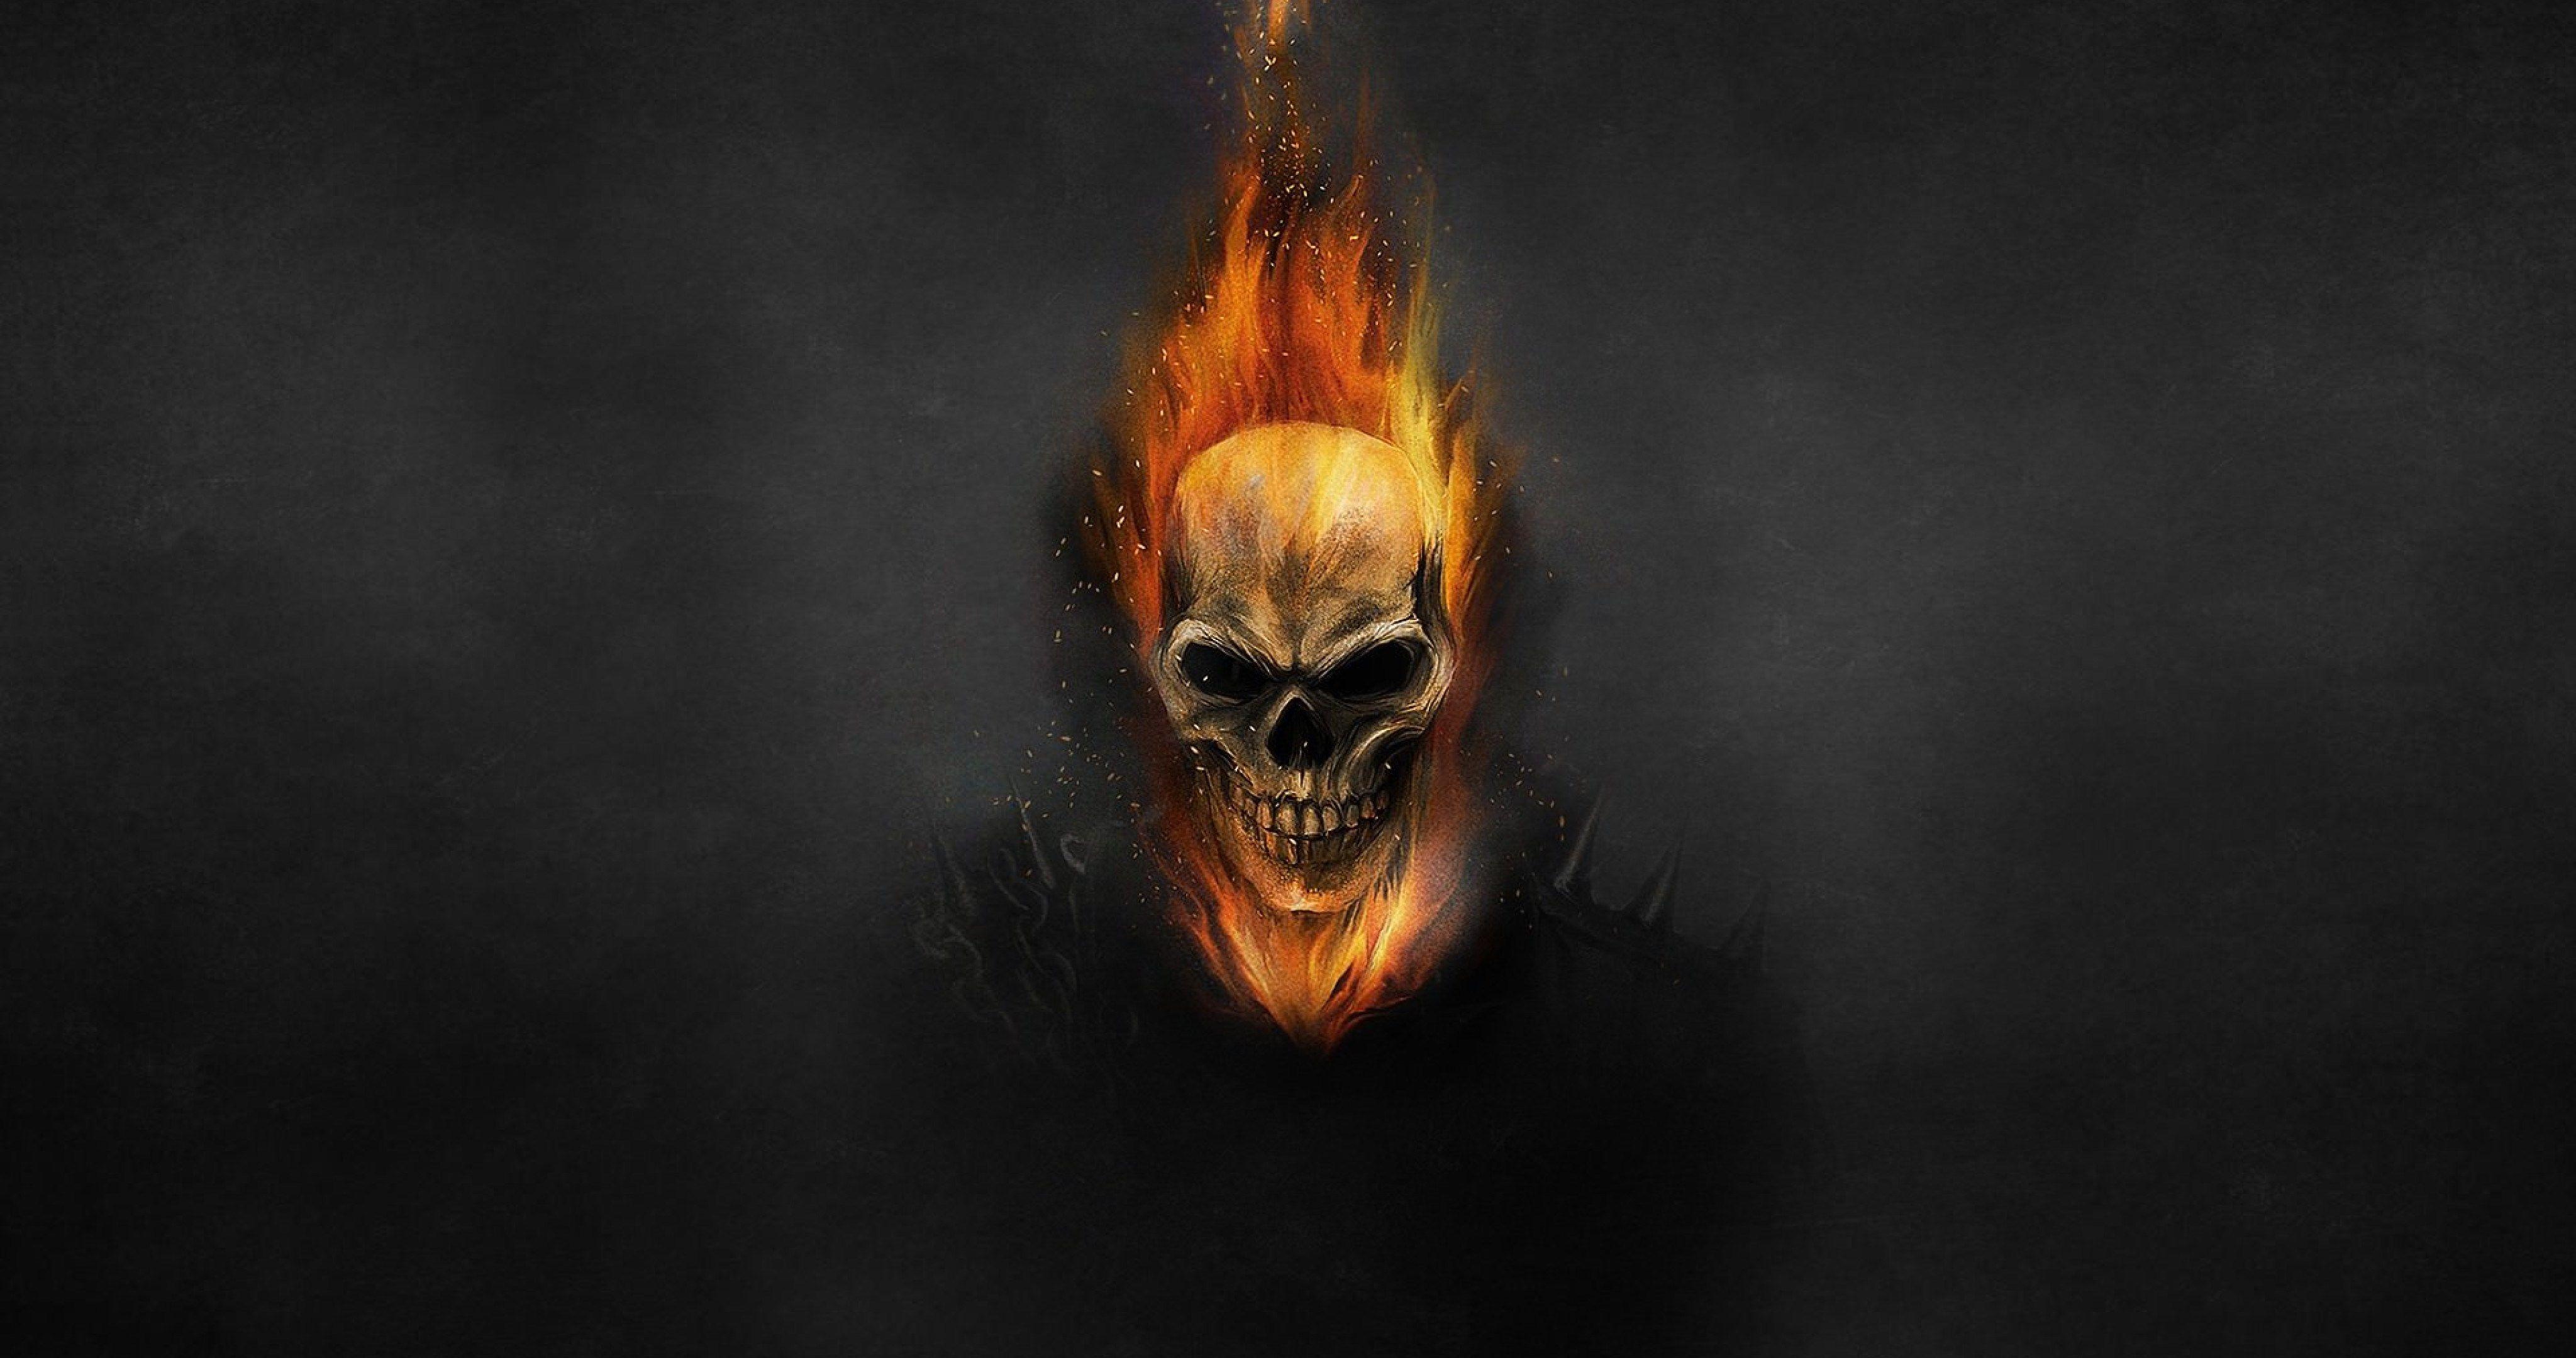 4096 x 2160 · jpeg - 4K Ghost Rider Wallpapers - Top Free 4K Ghost Rider Backgrounds ...